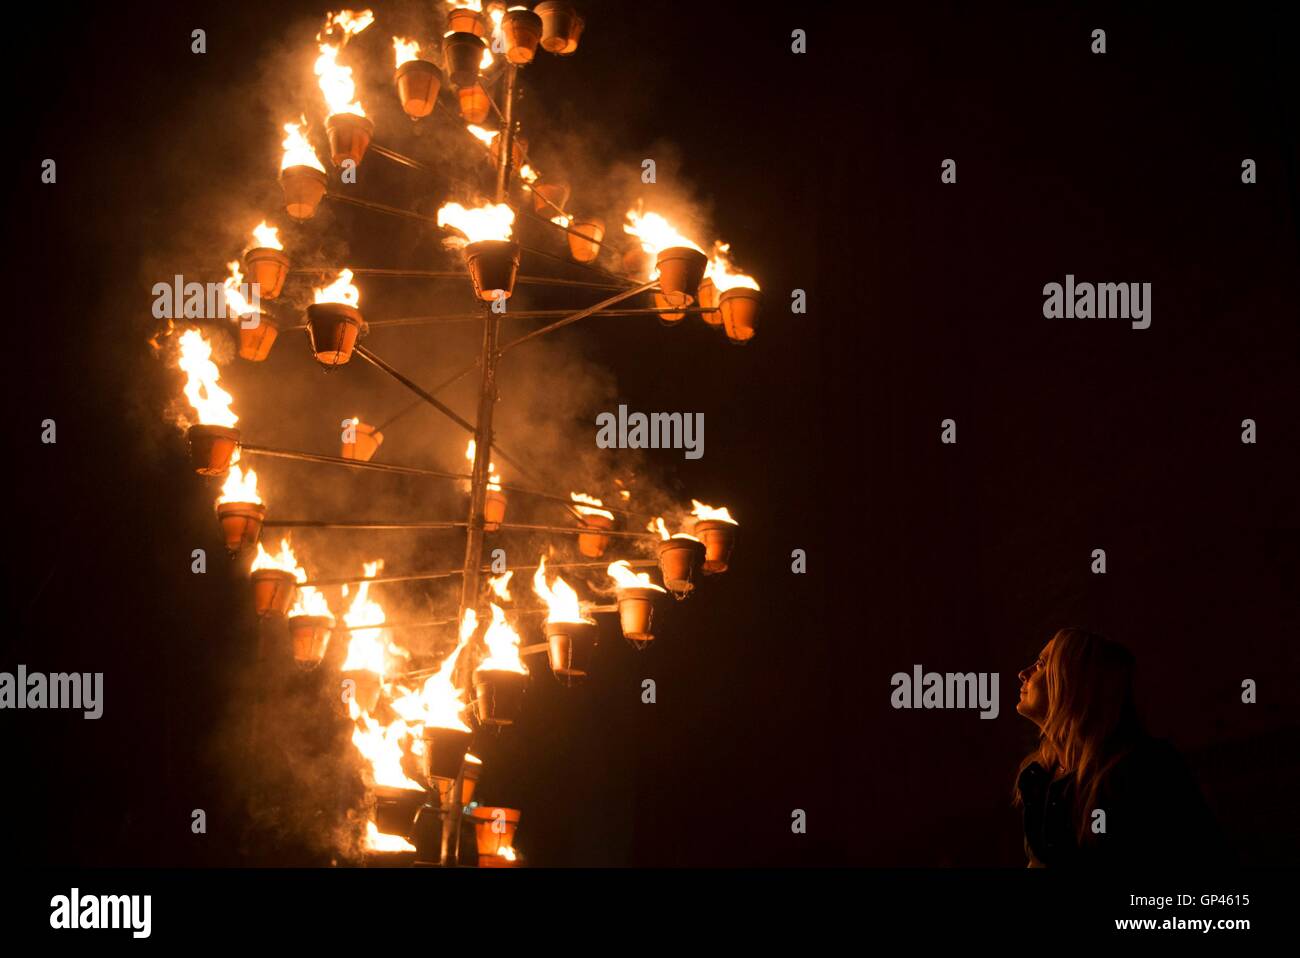 A woman looks at a burning structure as part of 'Fire Garden' by Compagnie Carabosse, in front of the Tate Modern in London to mark the 350th anniversary of the Great Fire of London. Stock Photo